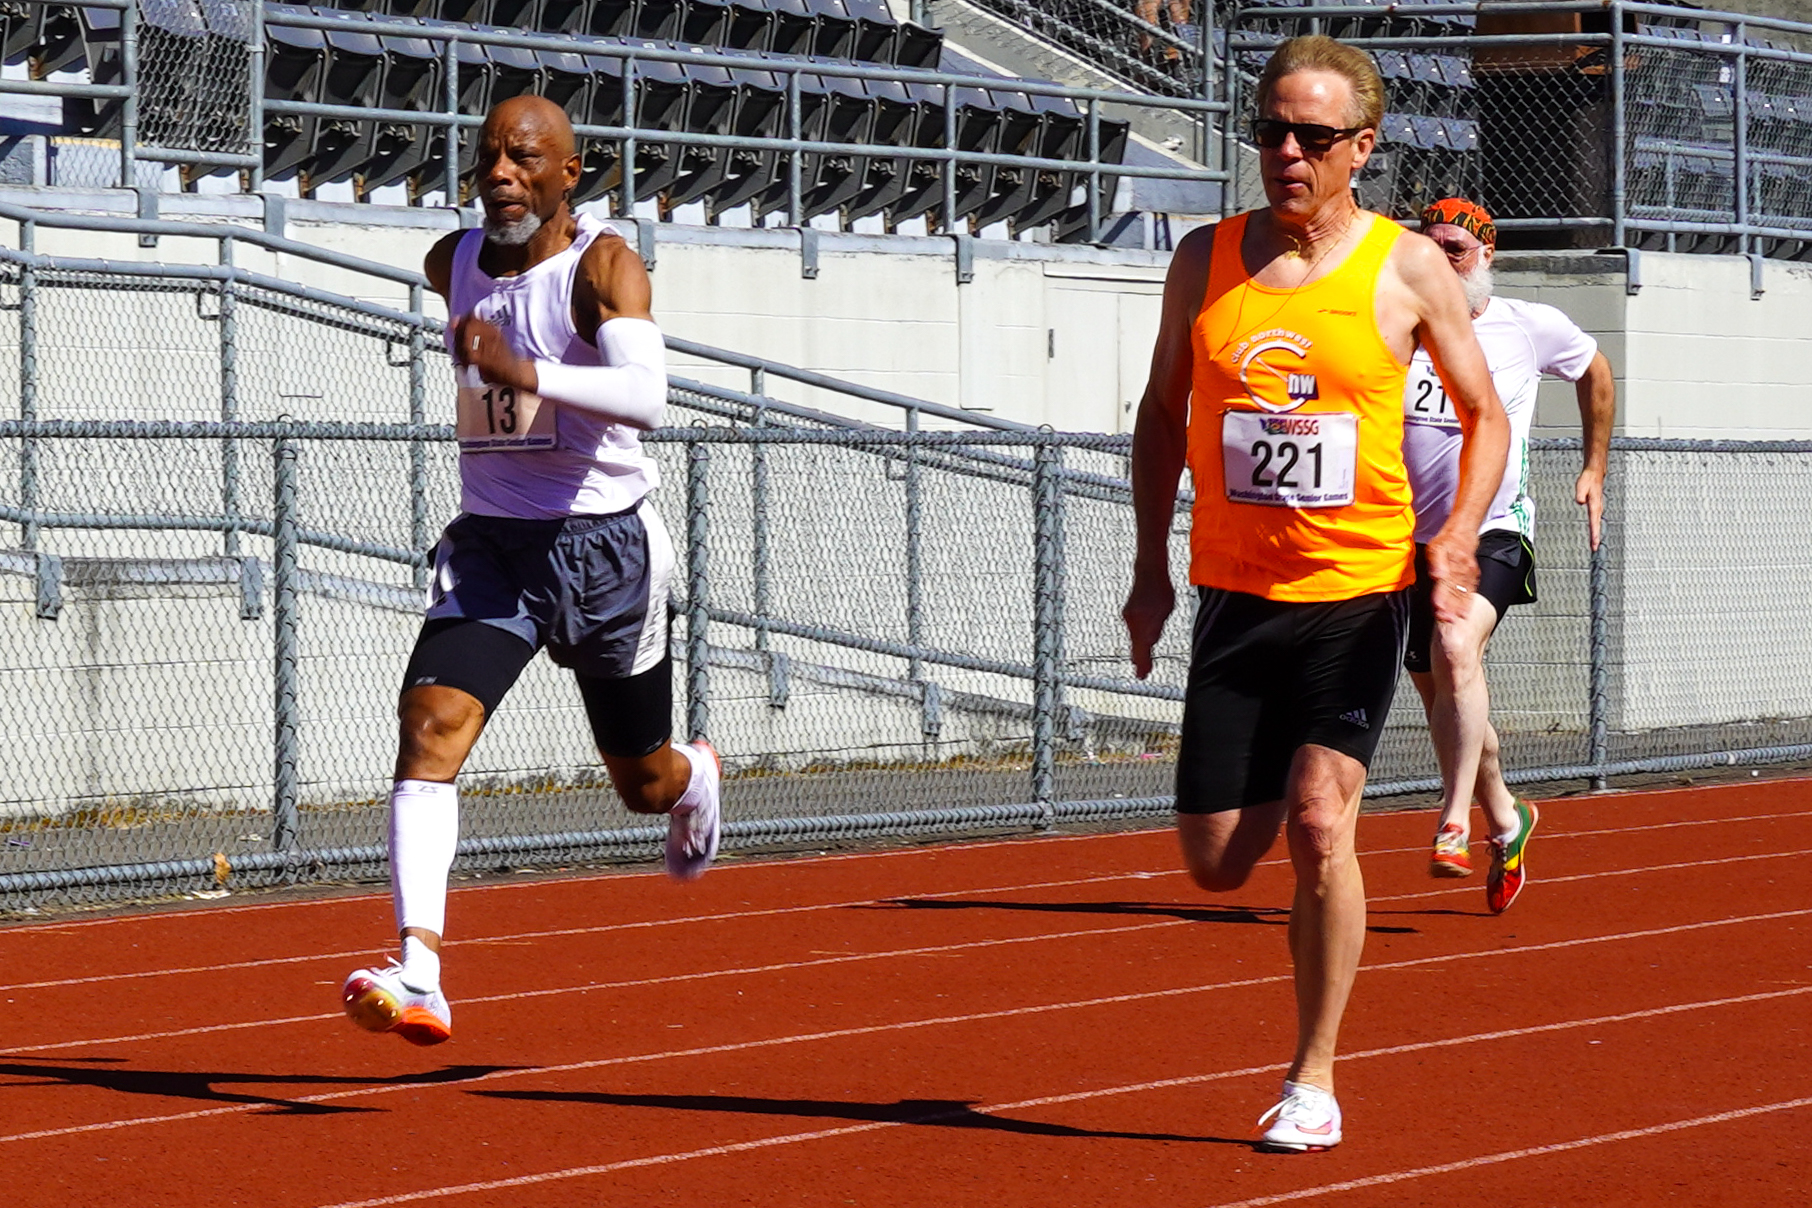 Photos from the Track & Field 200 Meter event on July 22nd